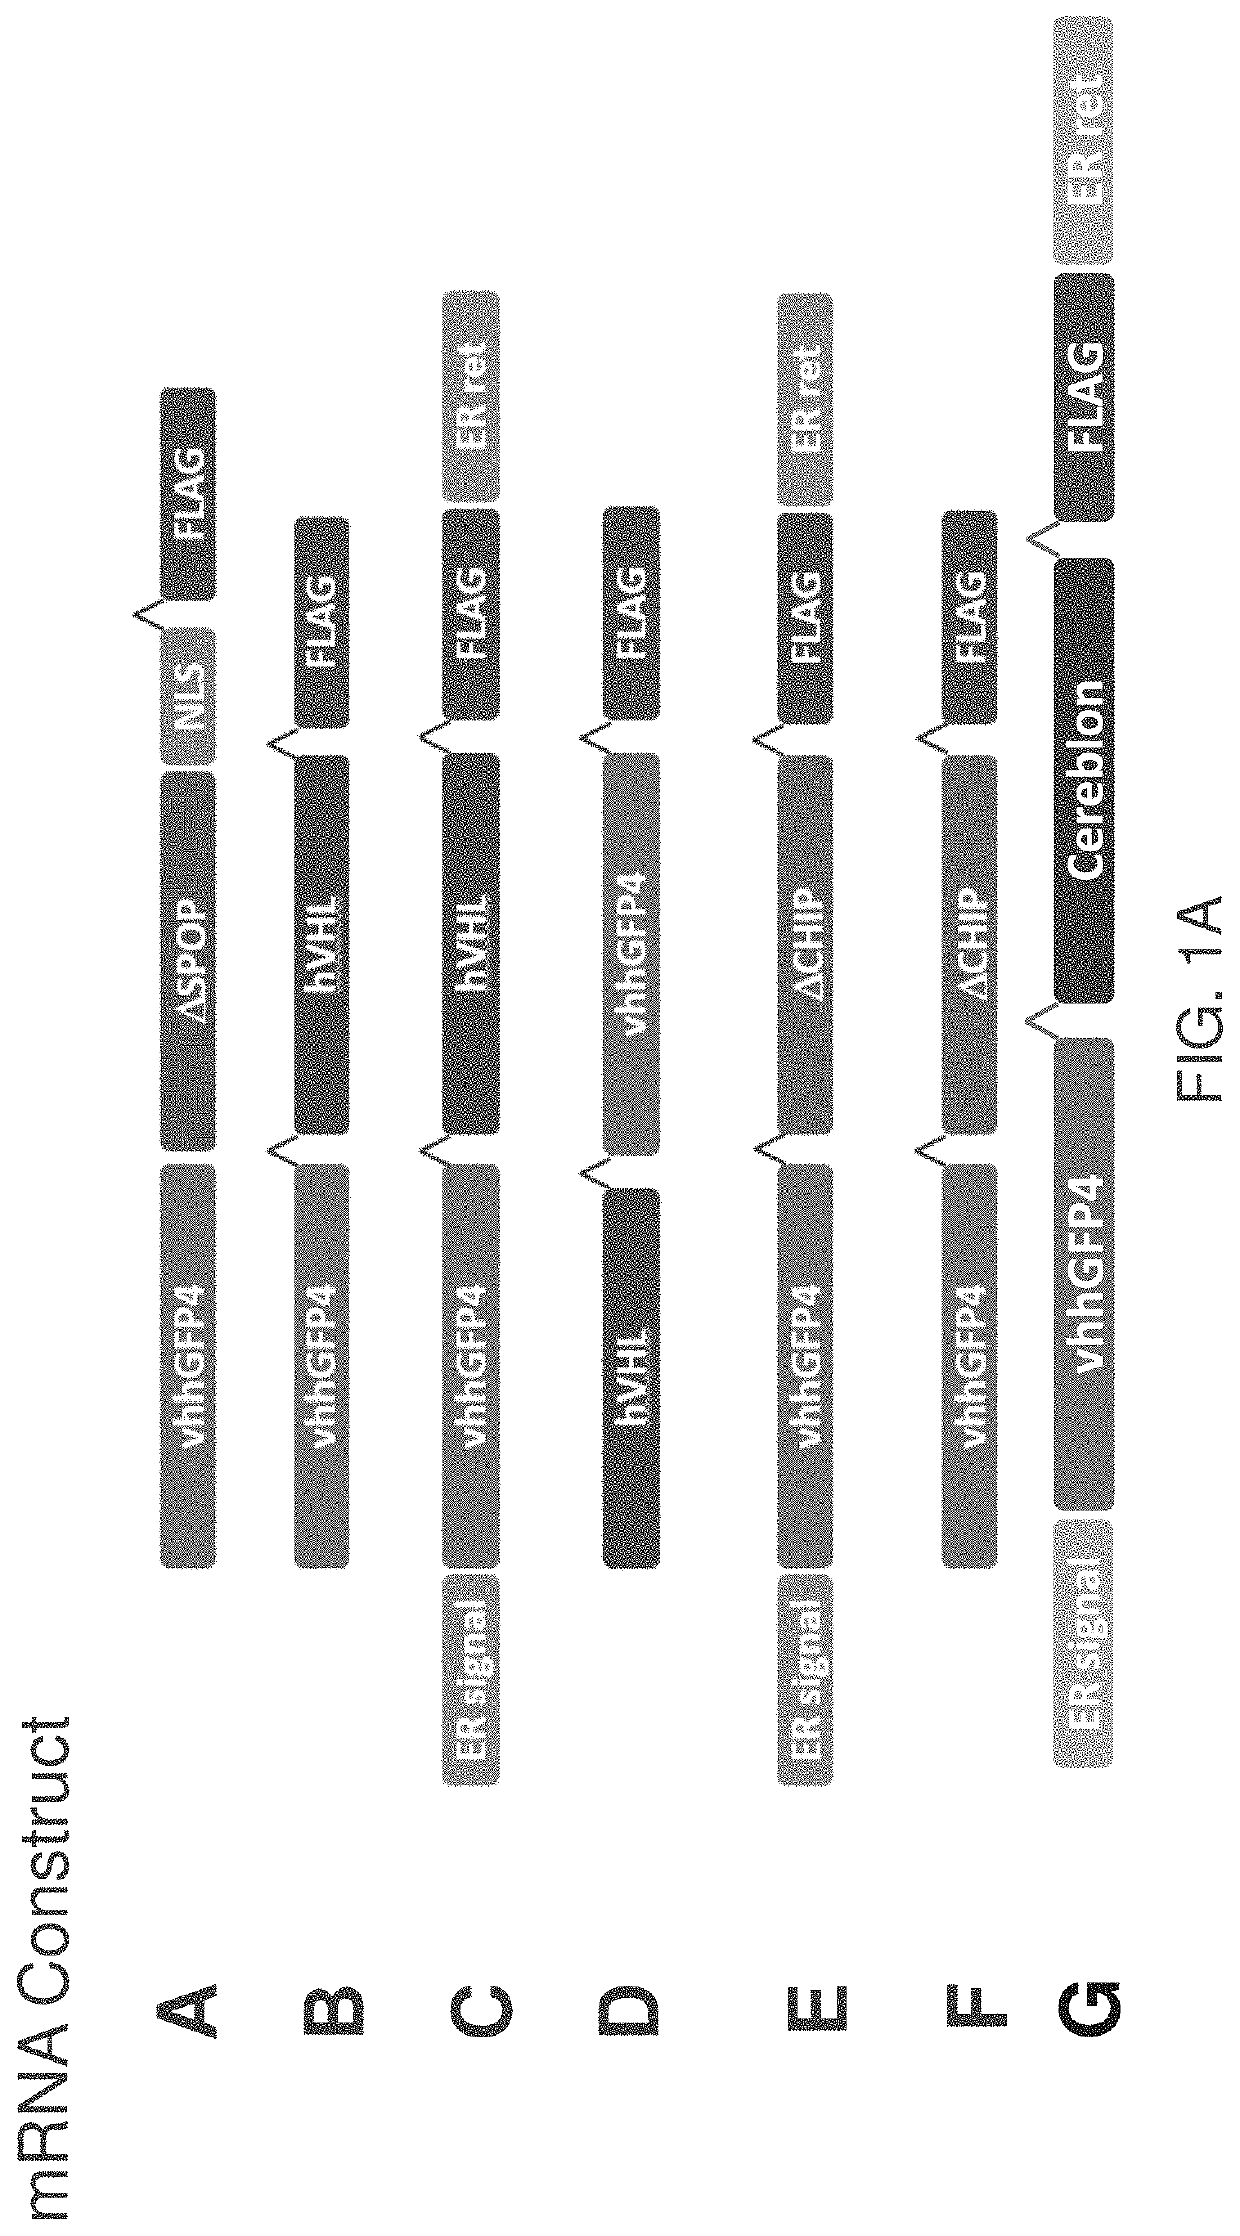 Compositions, methods and uses of messenger RNA